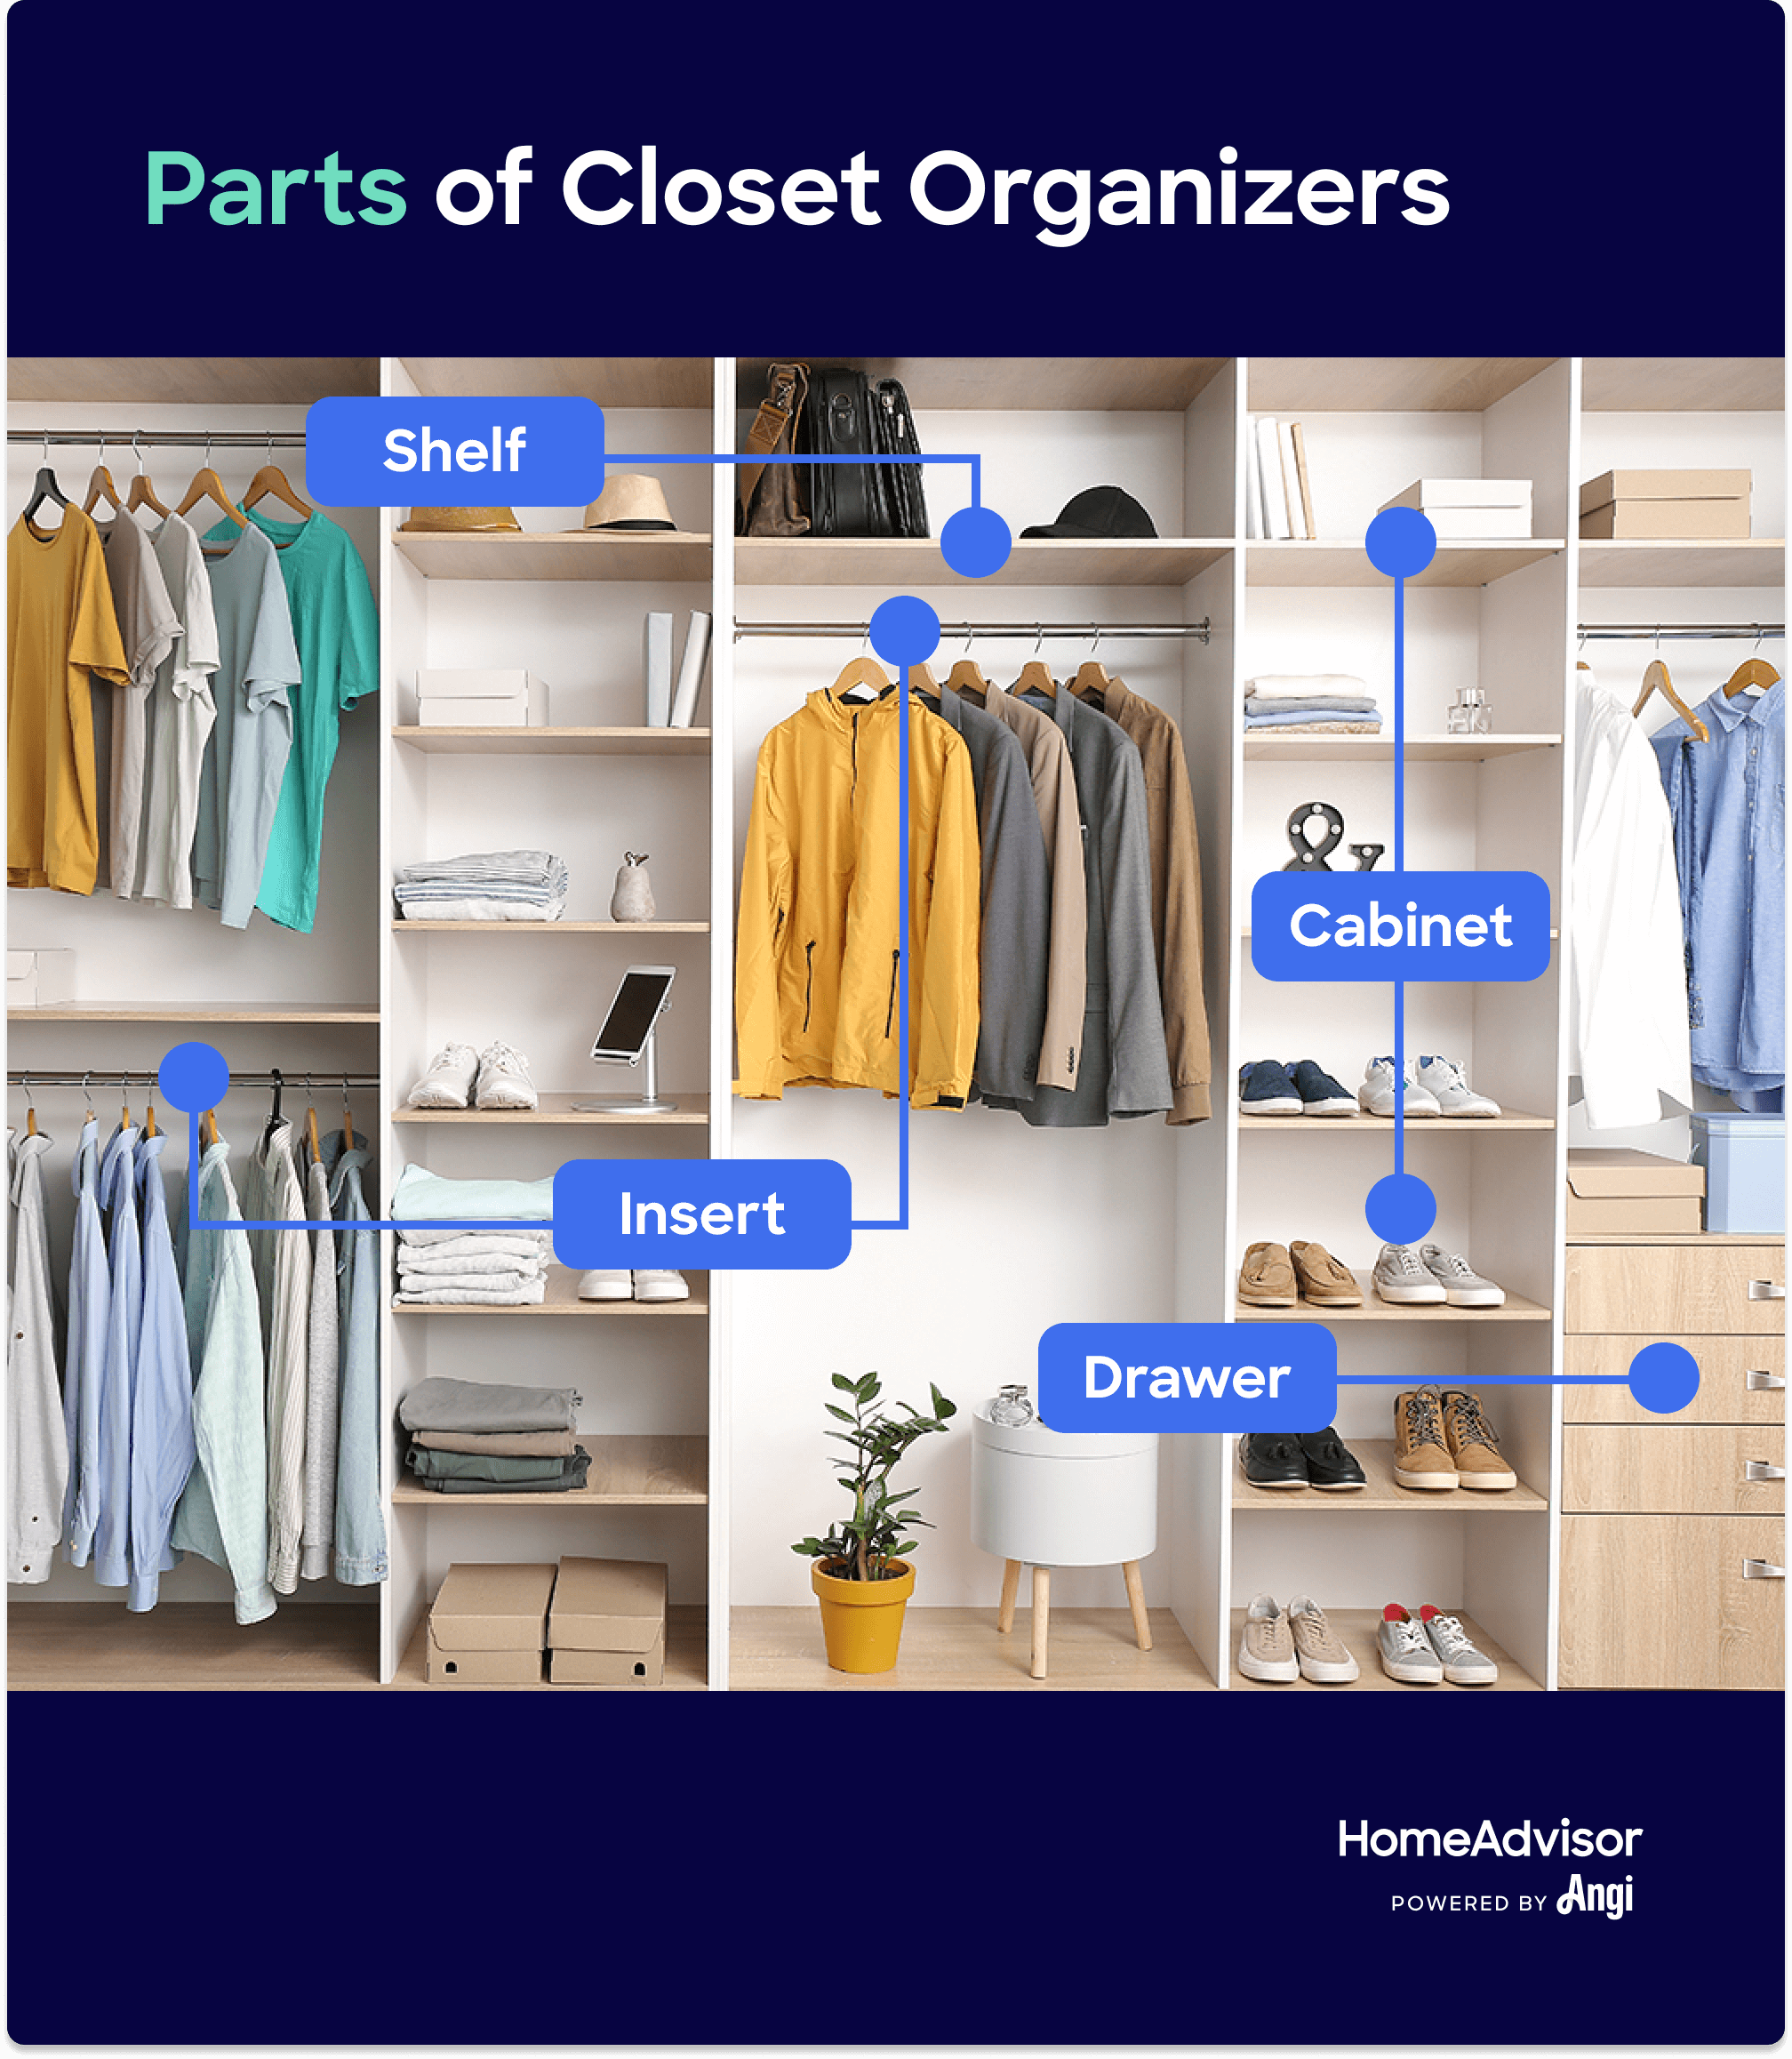 What Is the Average Cost of Closet Organizers?